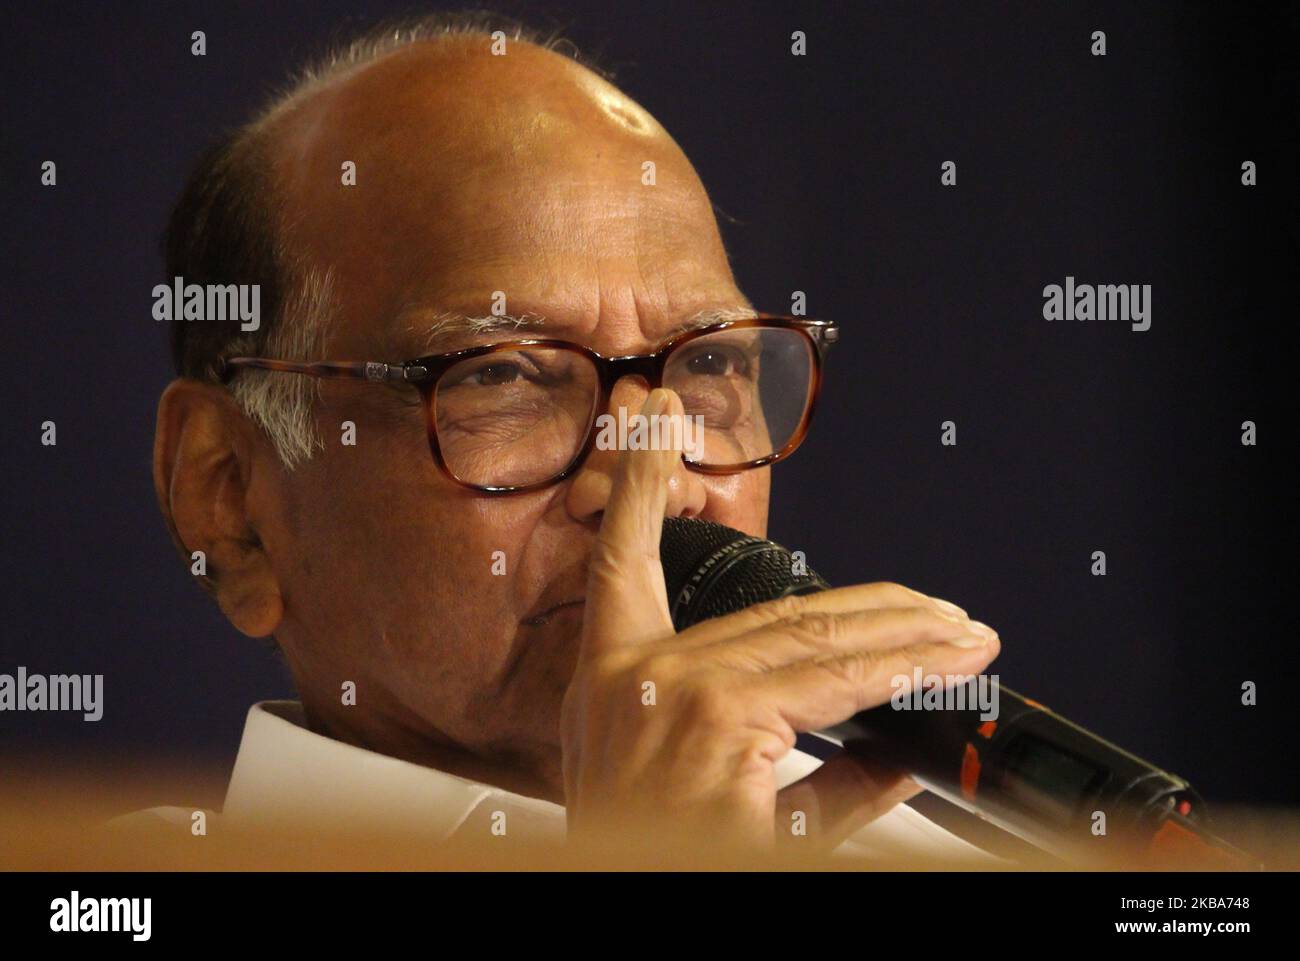 The Nationalist Congress Party (NCP) chief, Sharad Pawar looks on during a press conference in Mumbai, India on 06 November 2019. (Photo by Himanshu Bhatt/NurPhoto) Stock Photo